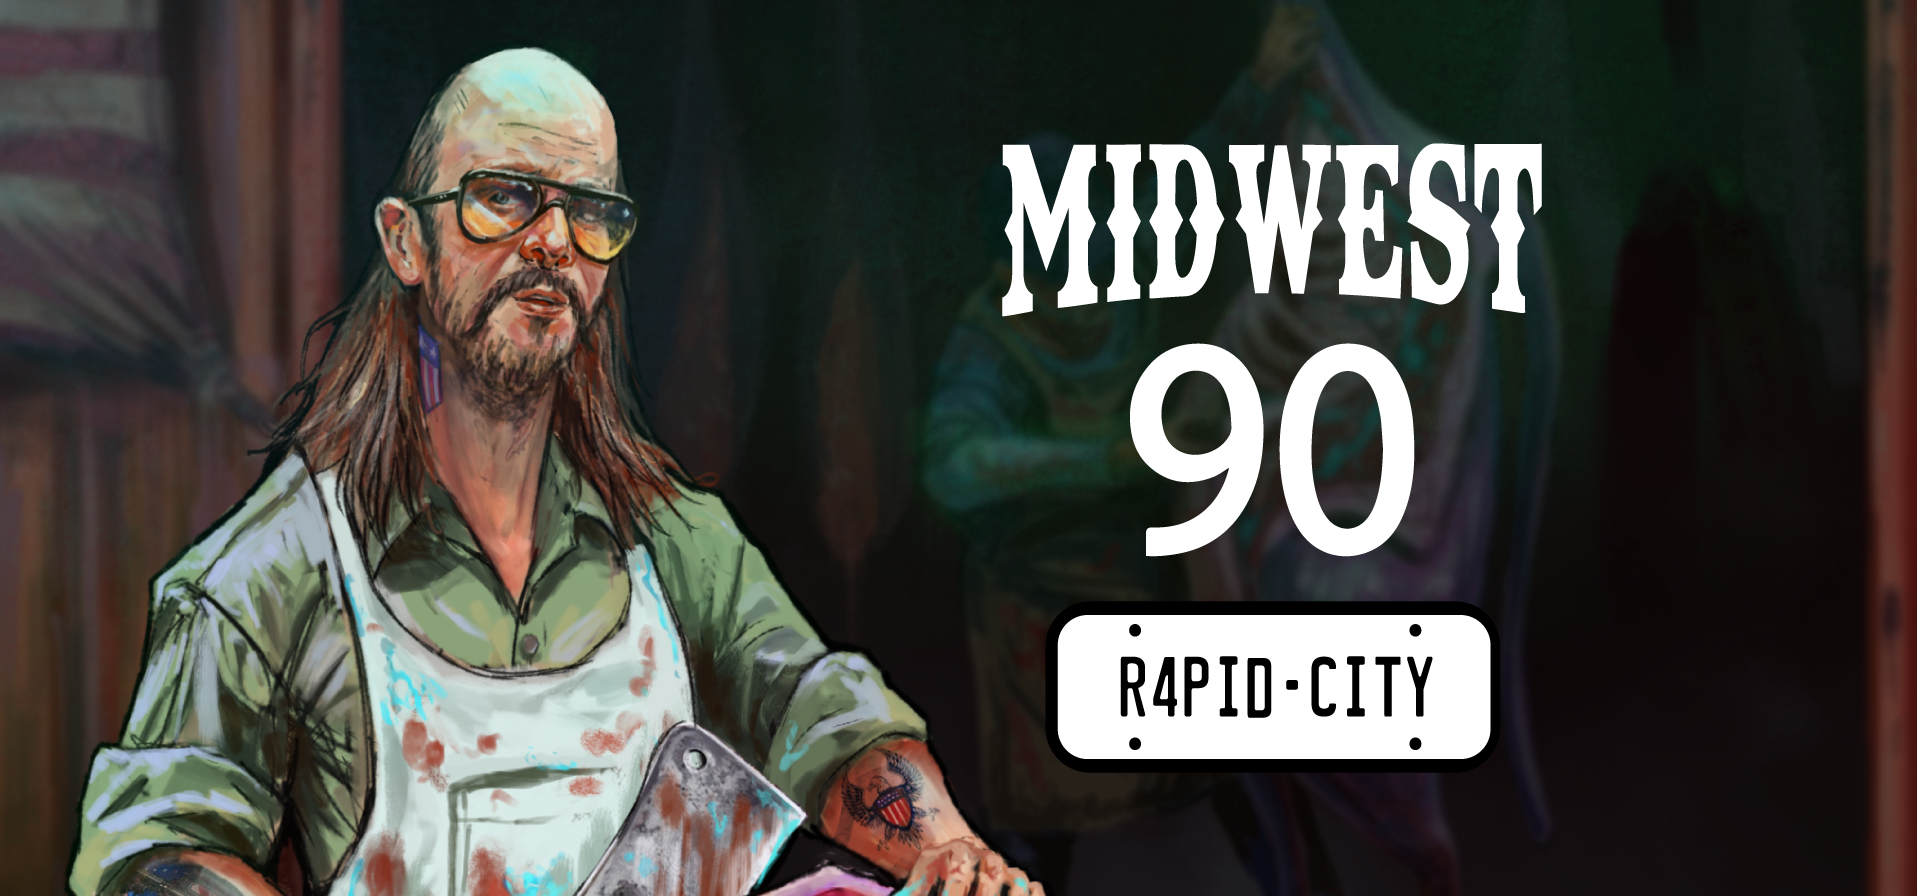 Midwest 90: Rapid City demo